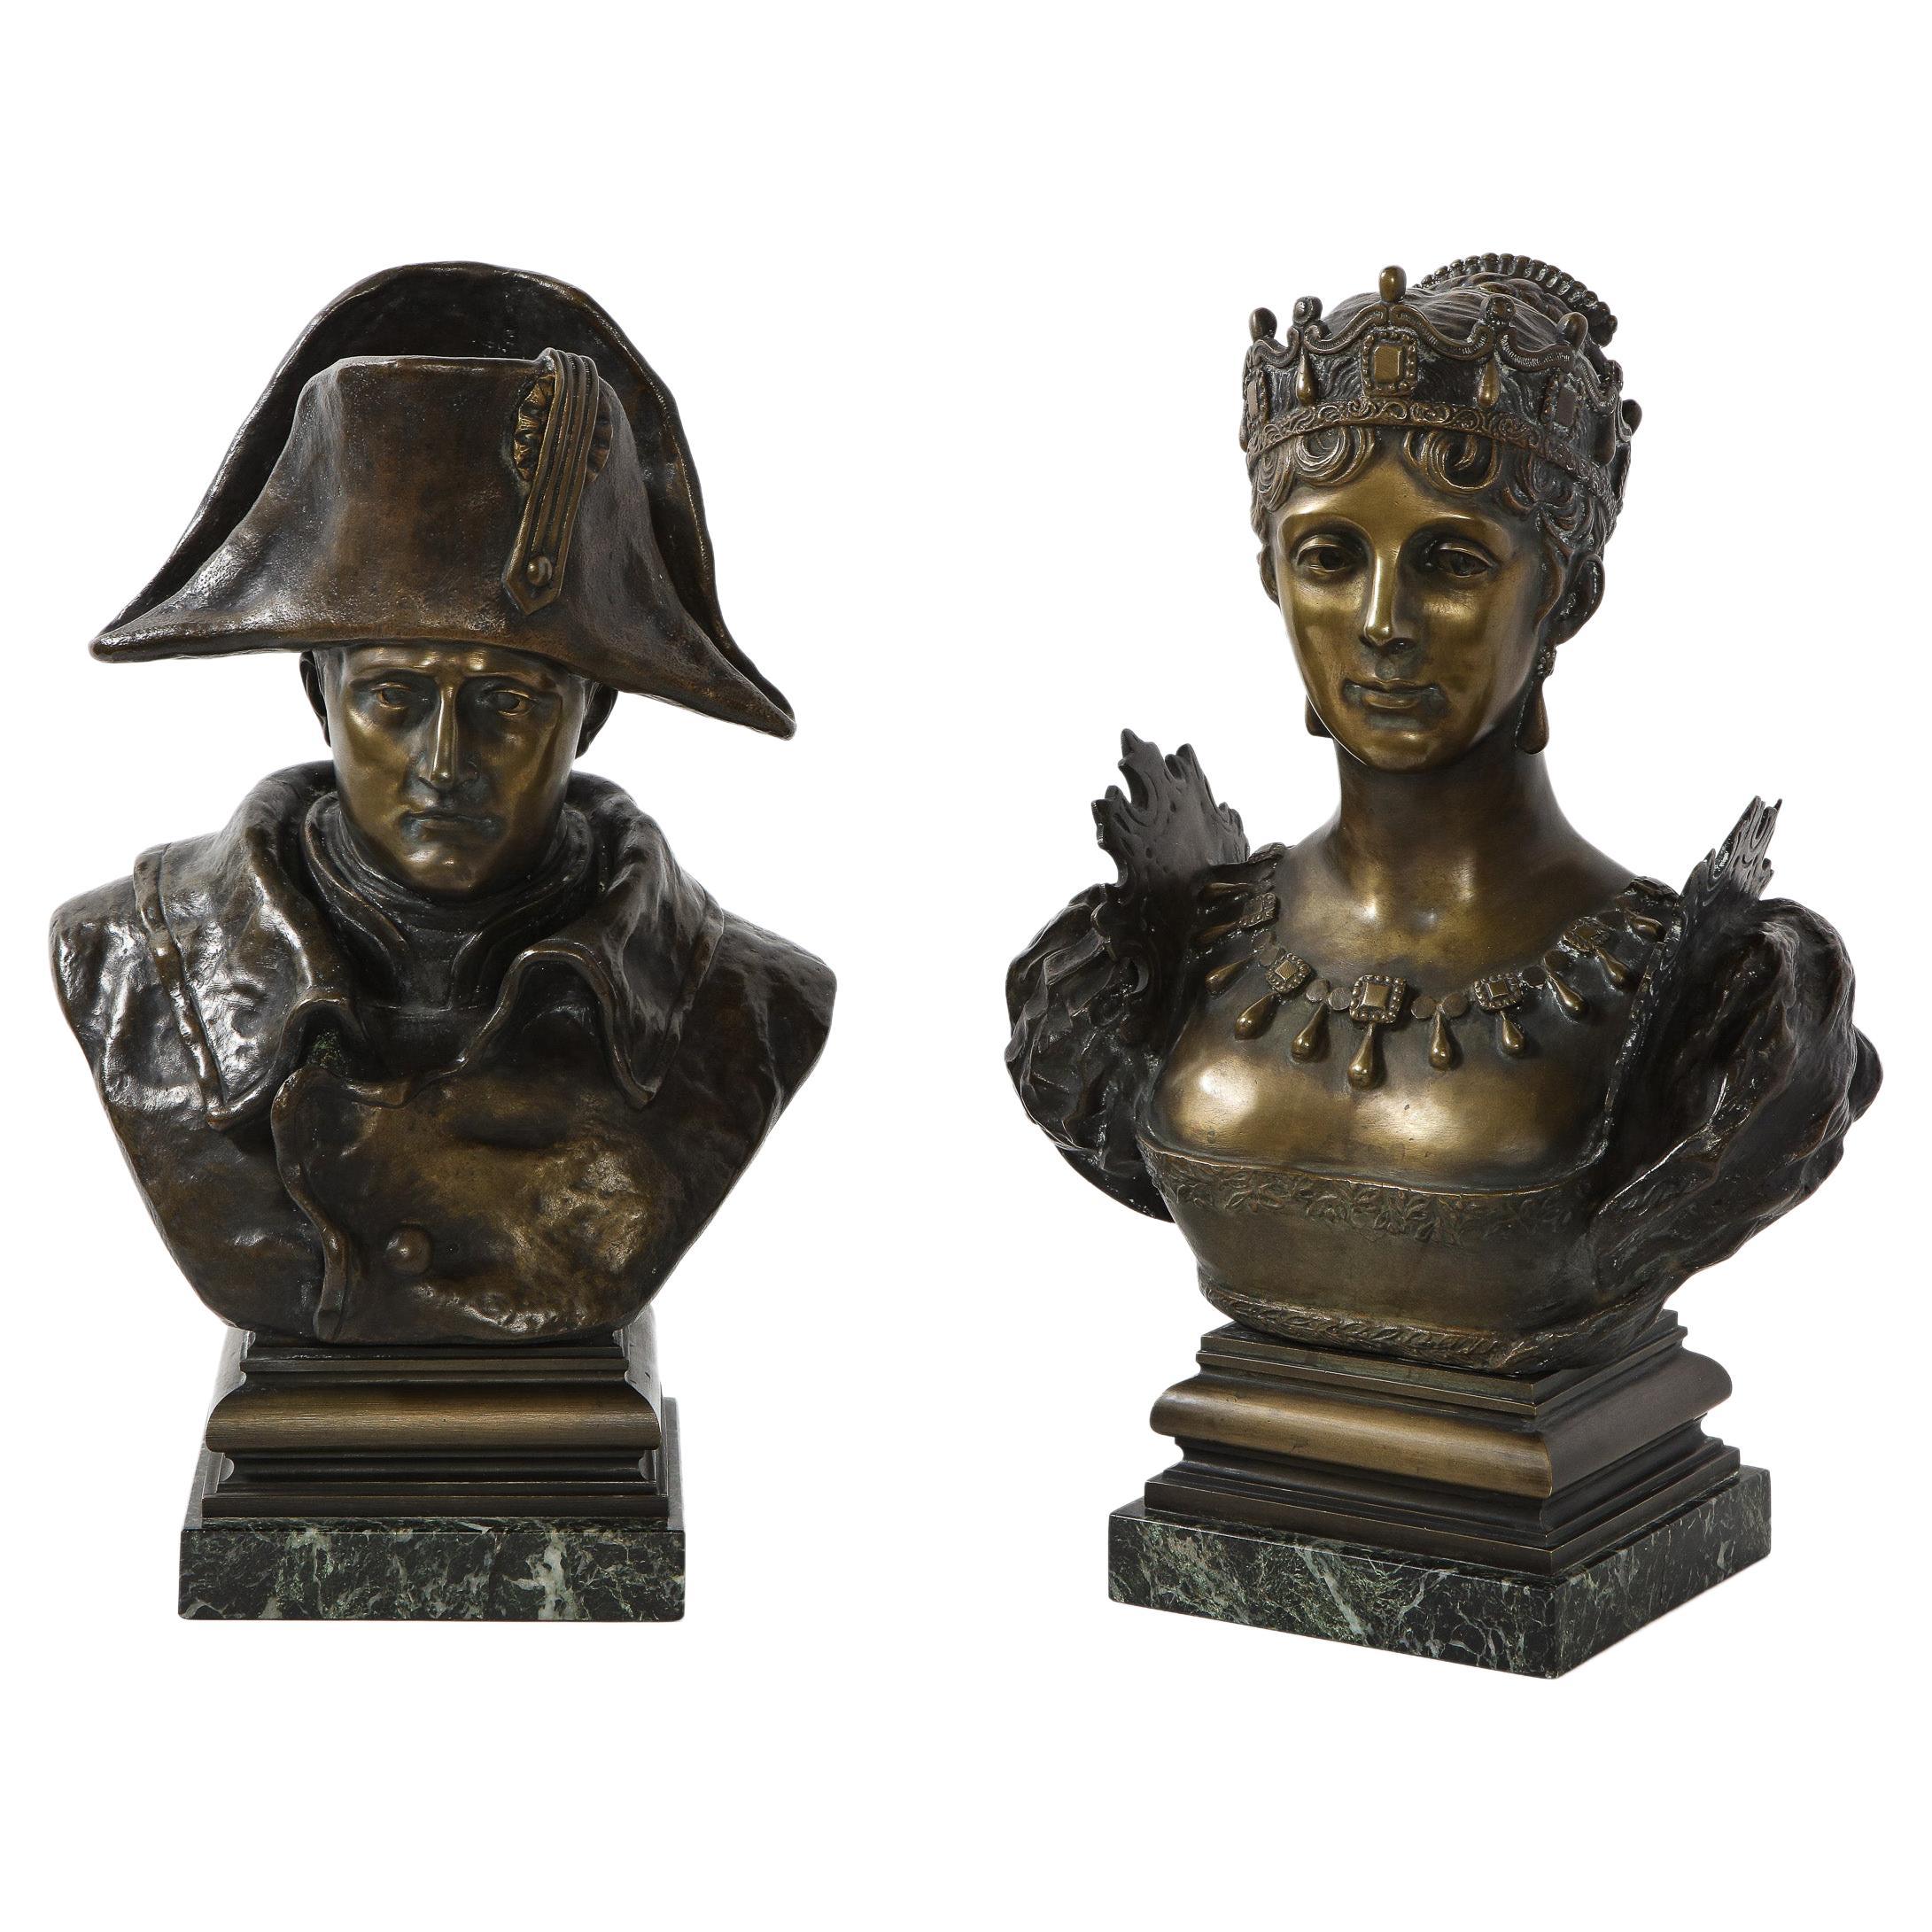 A pair of French patinated bronze busts of Napoleon and Empress Josephine, on green marble bases, late 19th century.

Very nice quality, and a good pair of sculptures for any room.

Measures: 17